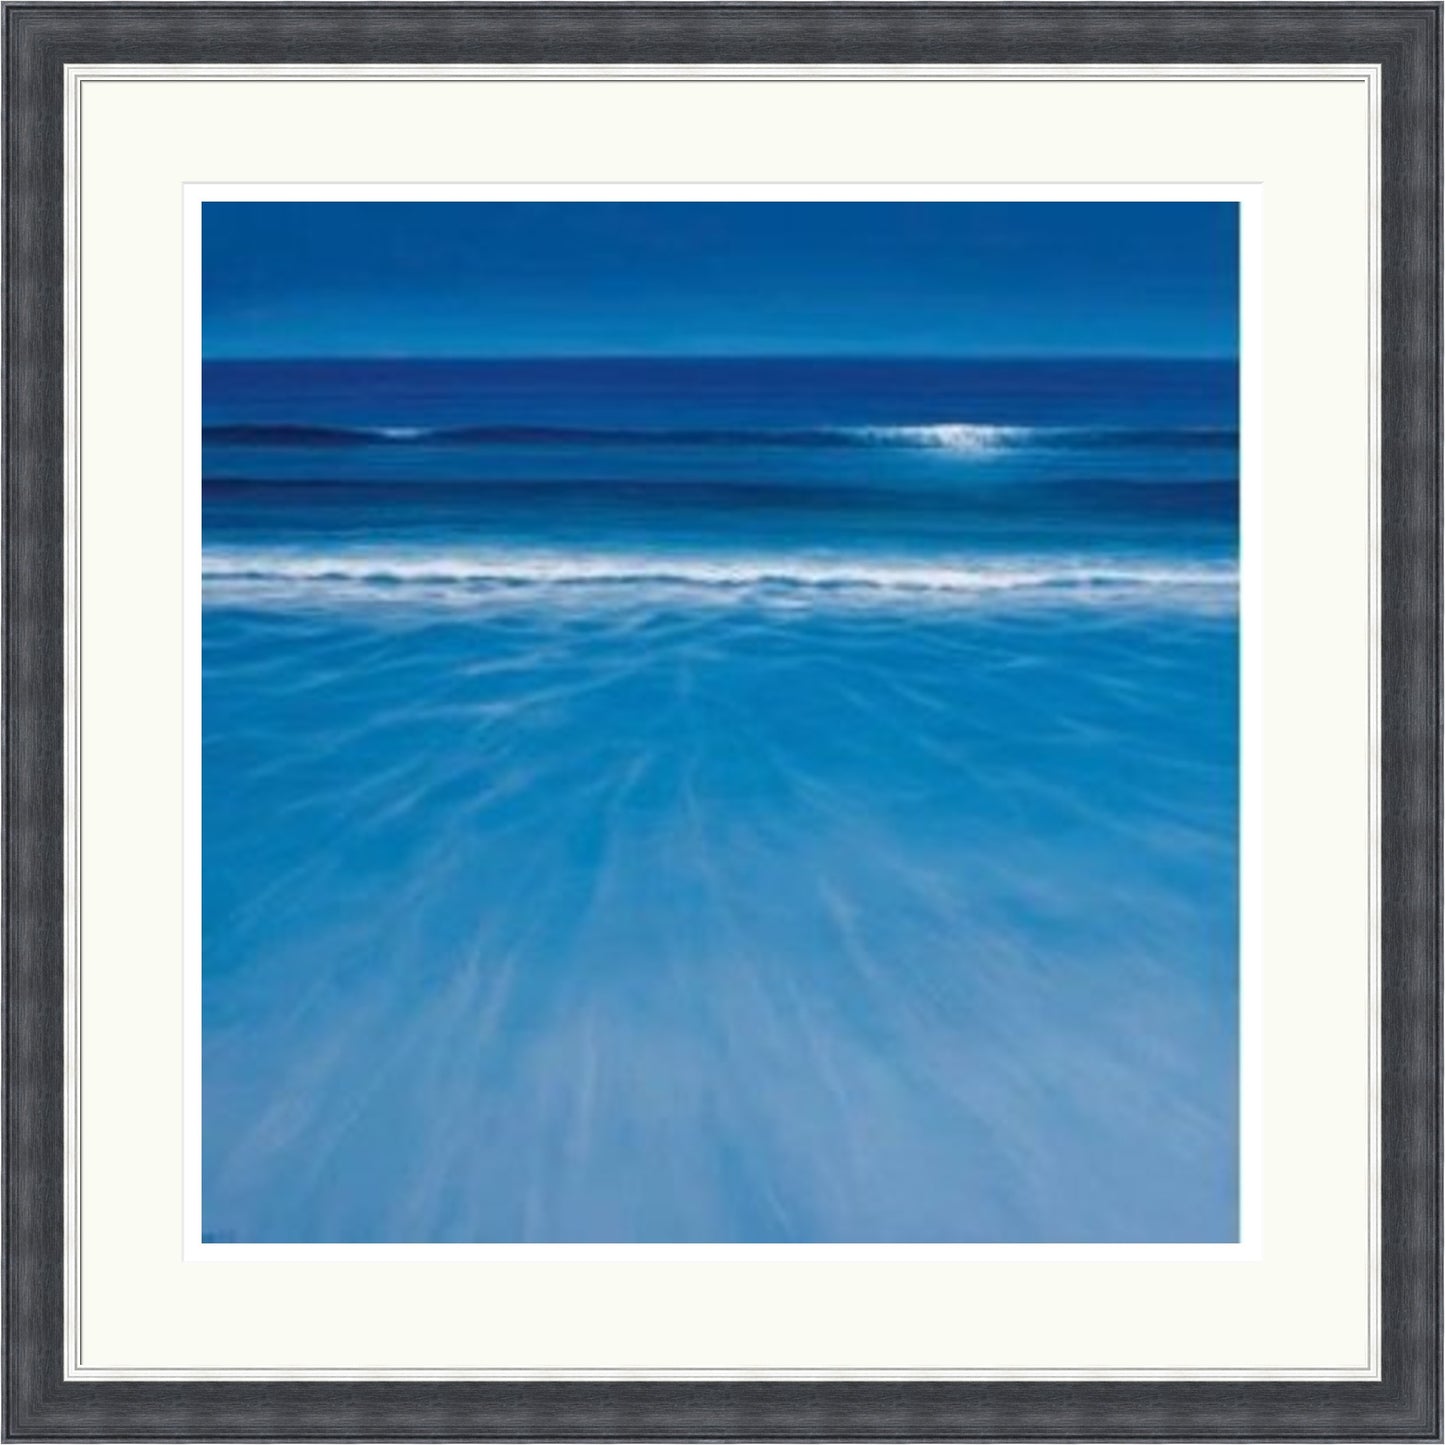 Into the Blue (Limited Edition) by Derek Hare